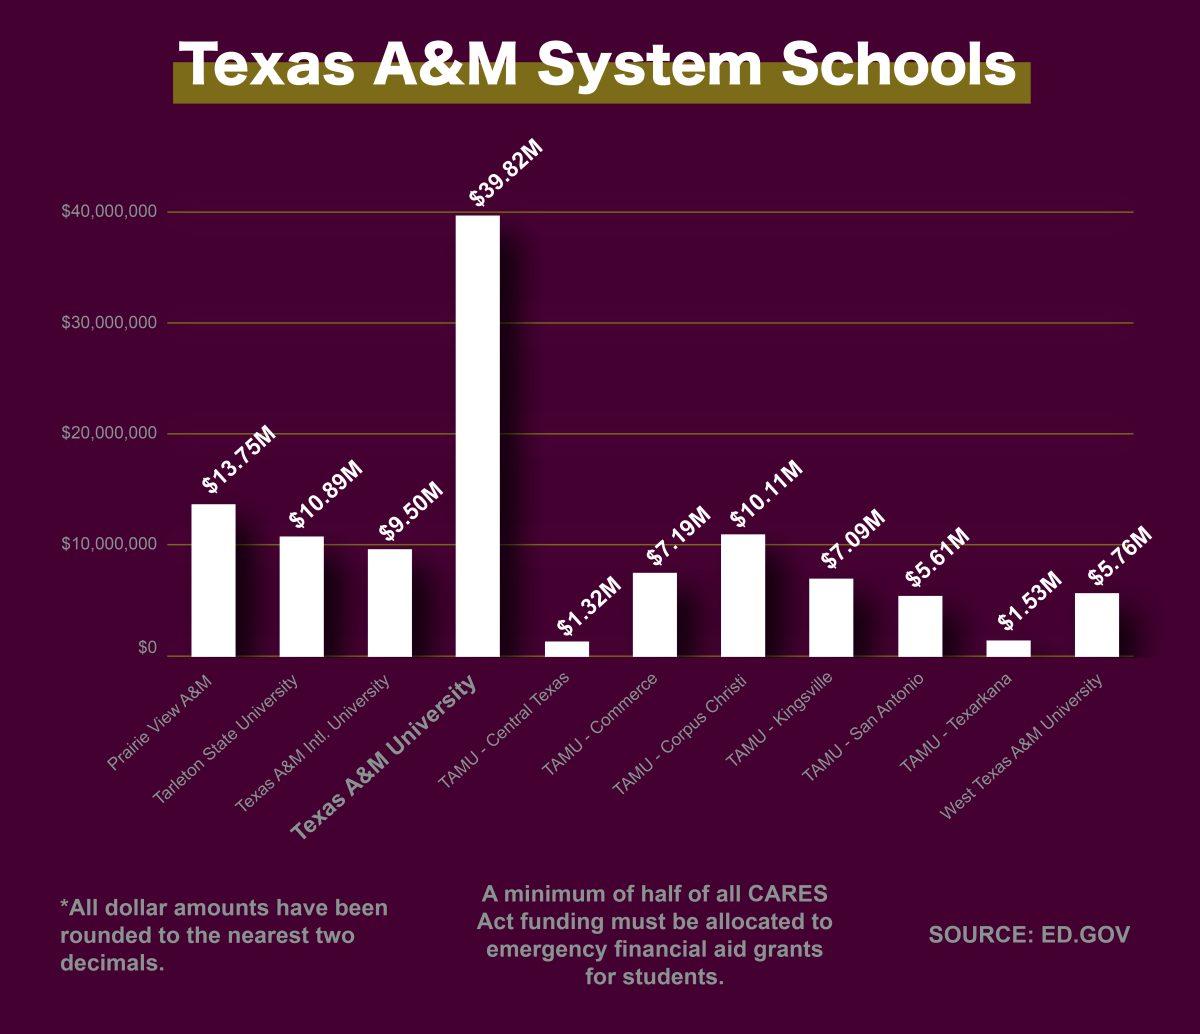 Texas A&M System schools received in total over $112.5 million from the CARES Act.